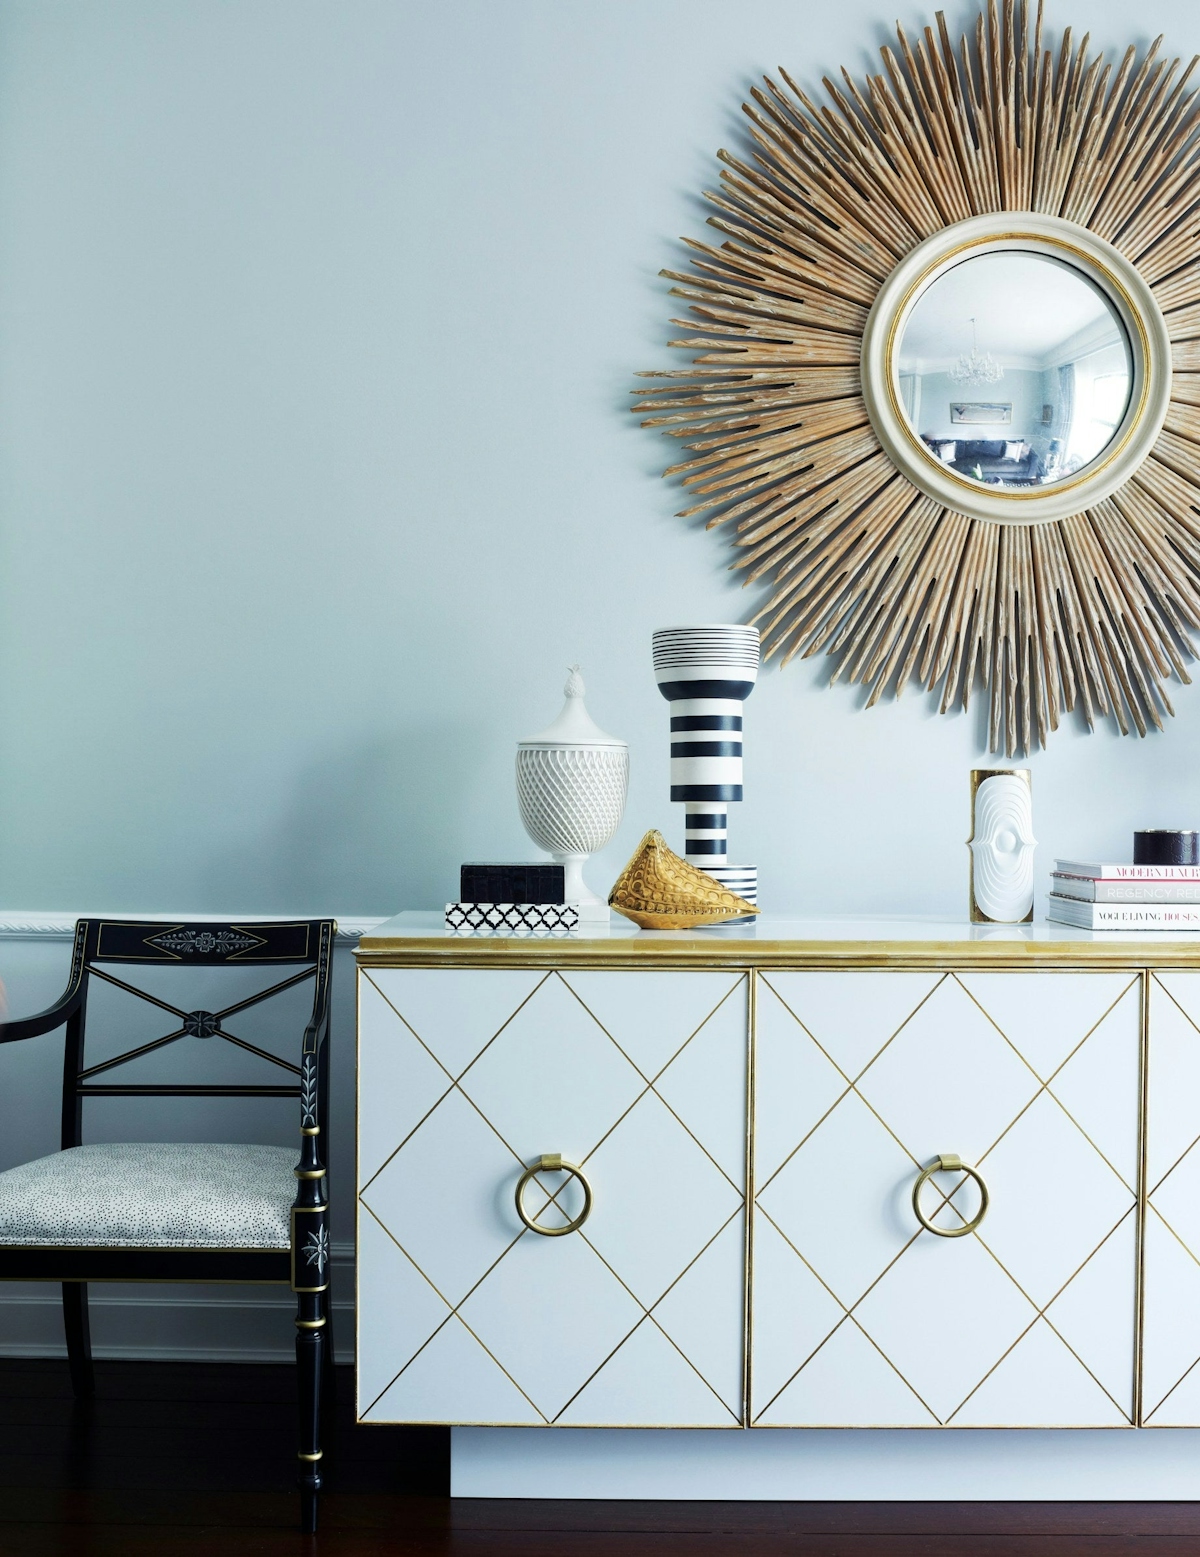 Statement Mirrors - 7 Ways To Make a Statement In Your Living Room - LuxDeco.com